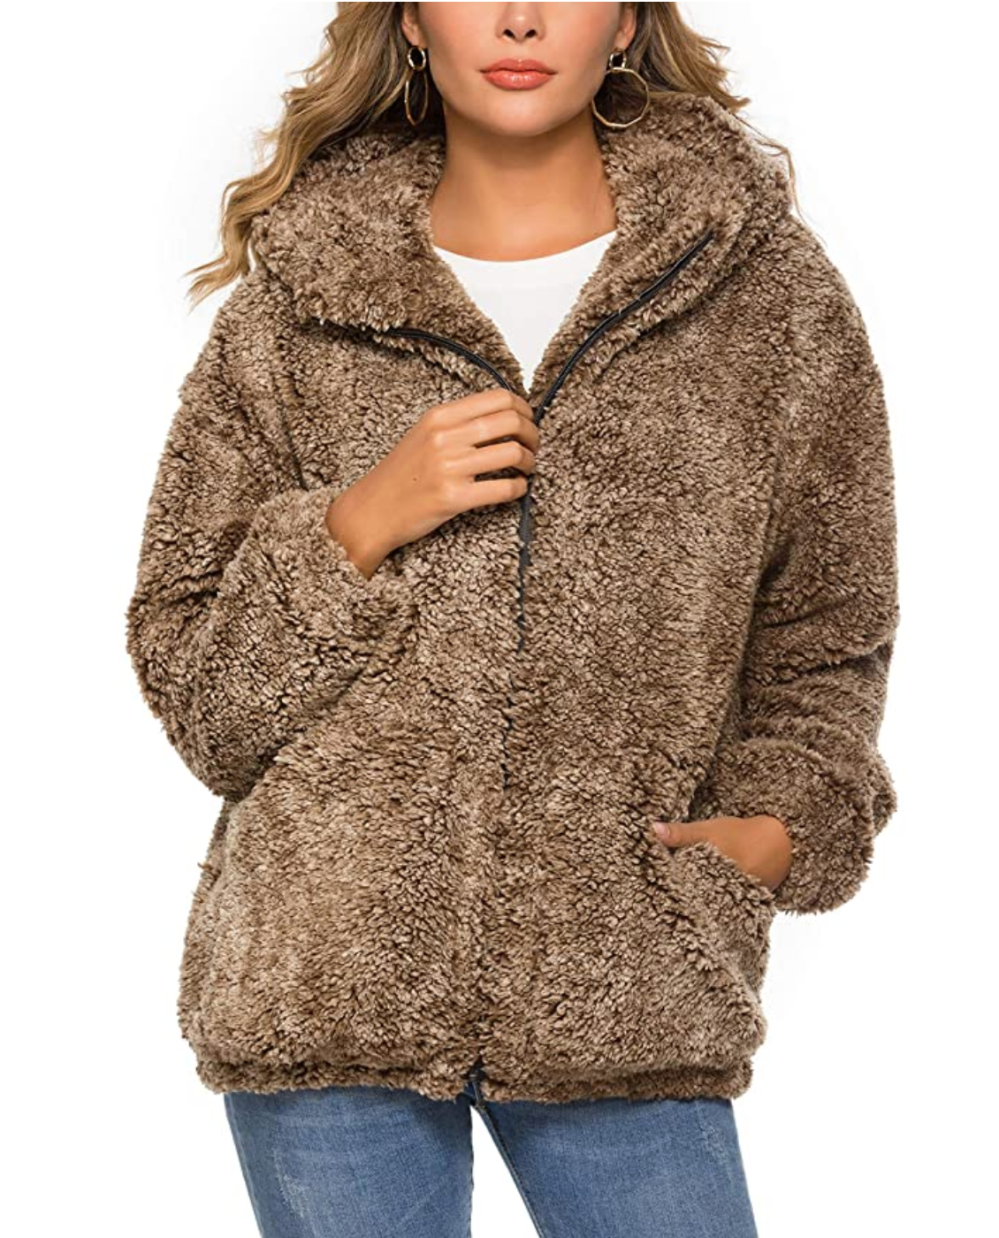 ANRABESS Women's Fashion Hooded Zip Up Faux Shearling Shaggy Oversized Coat